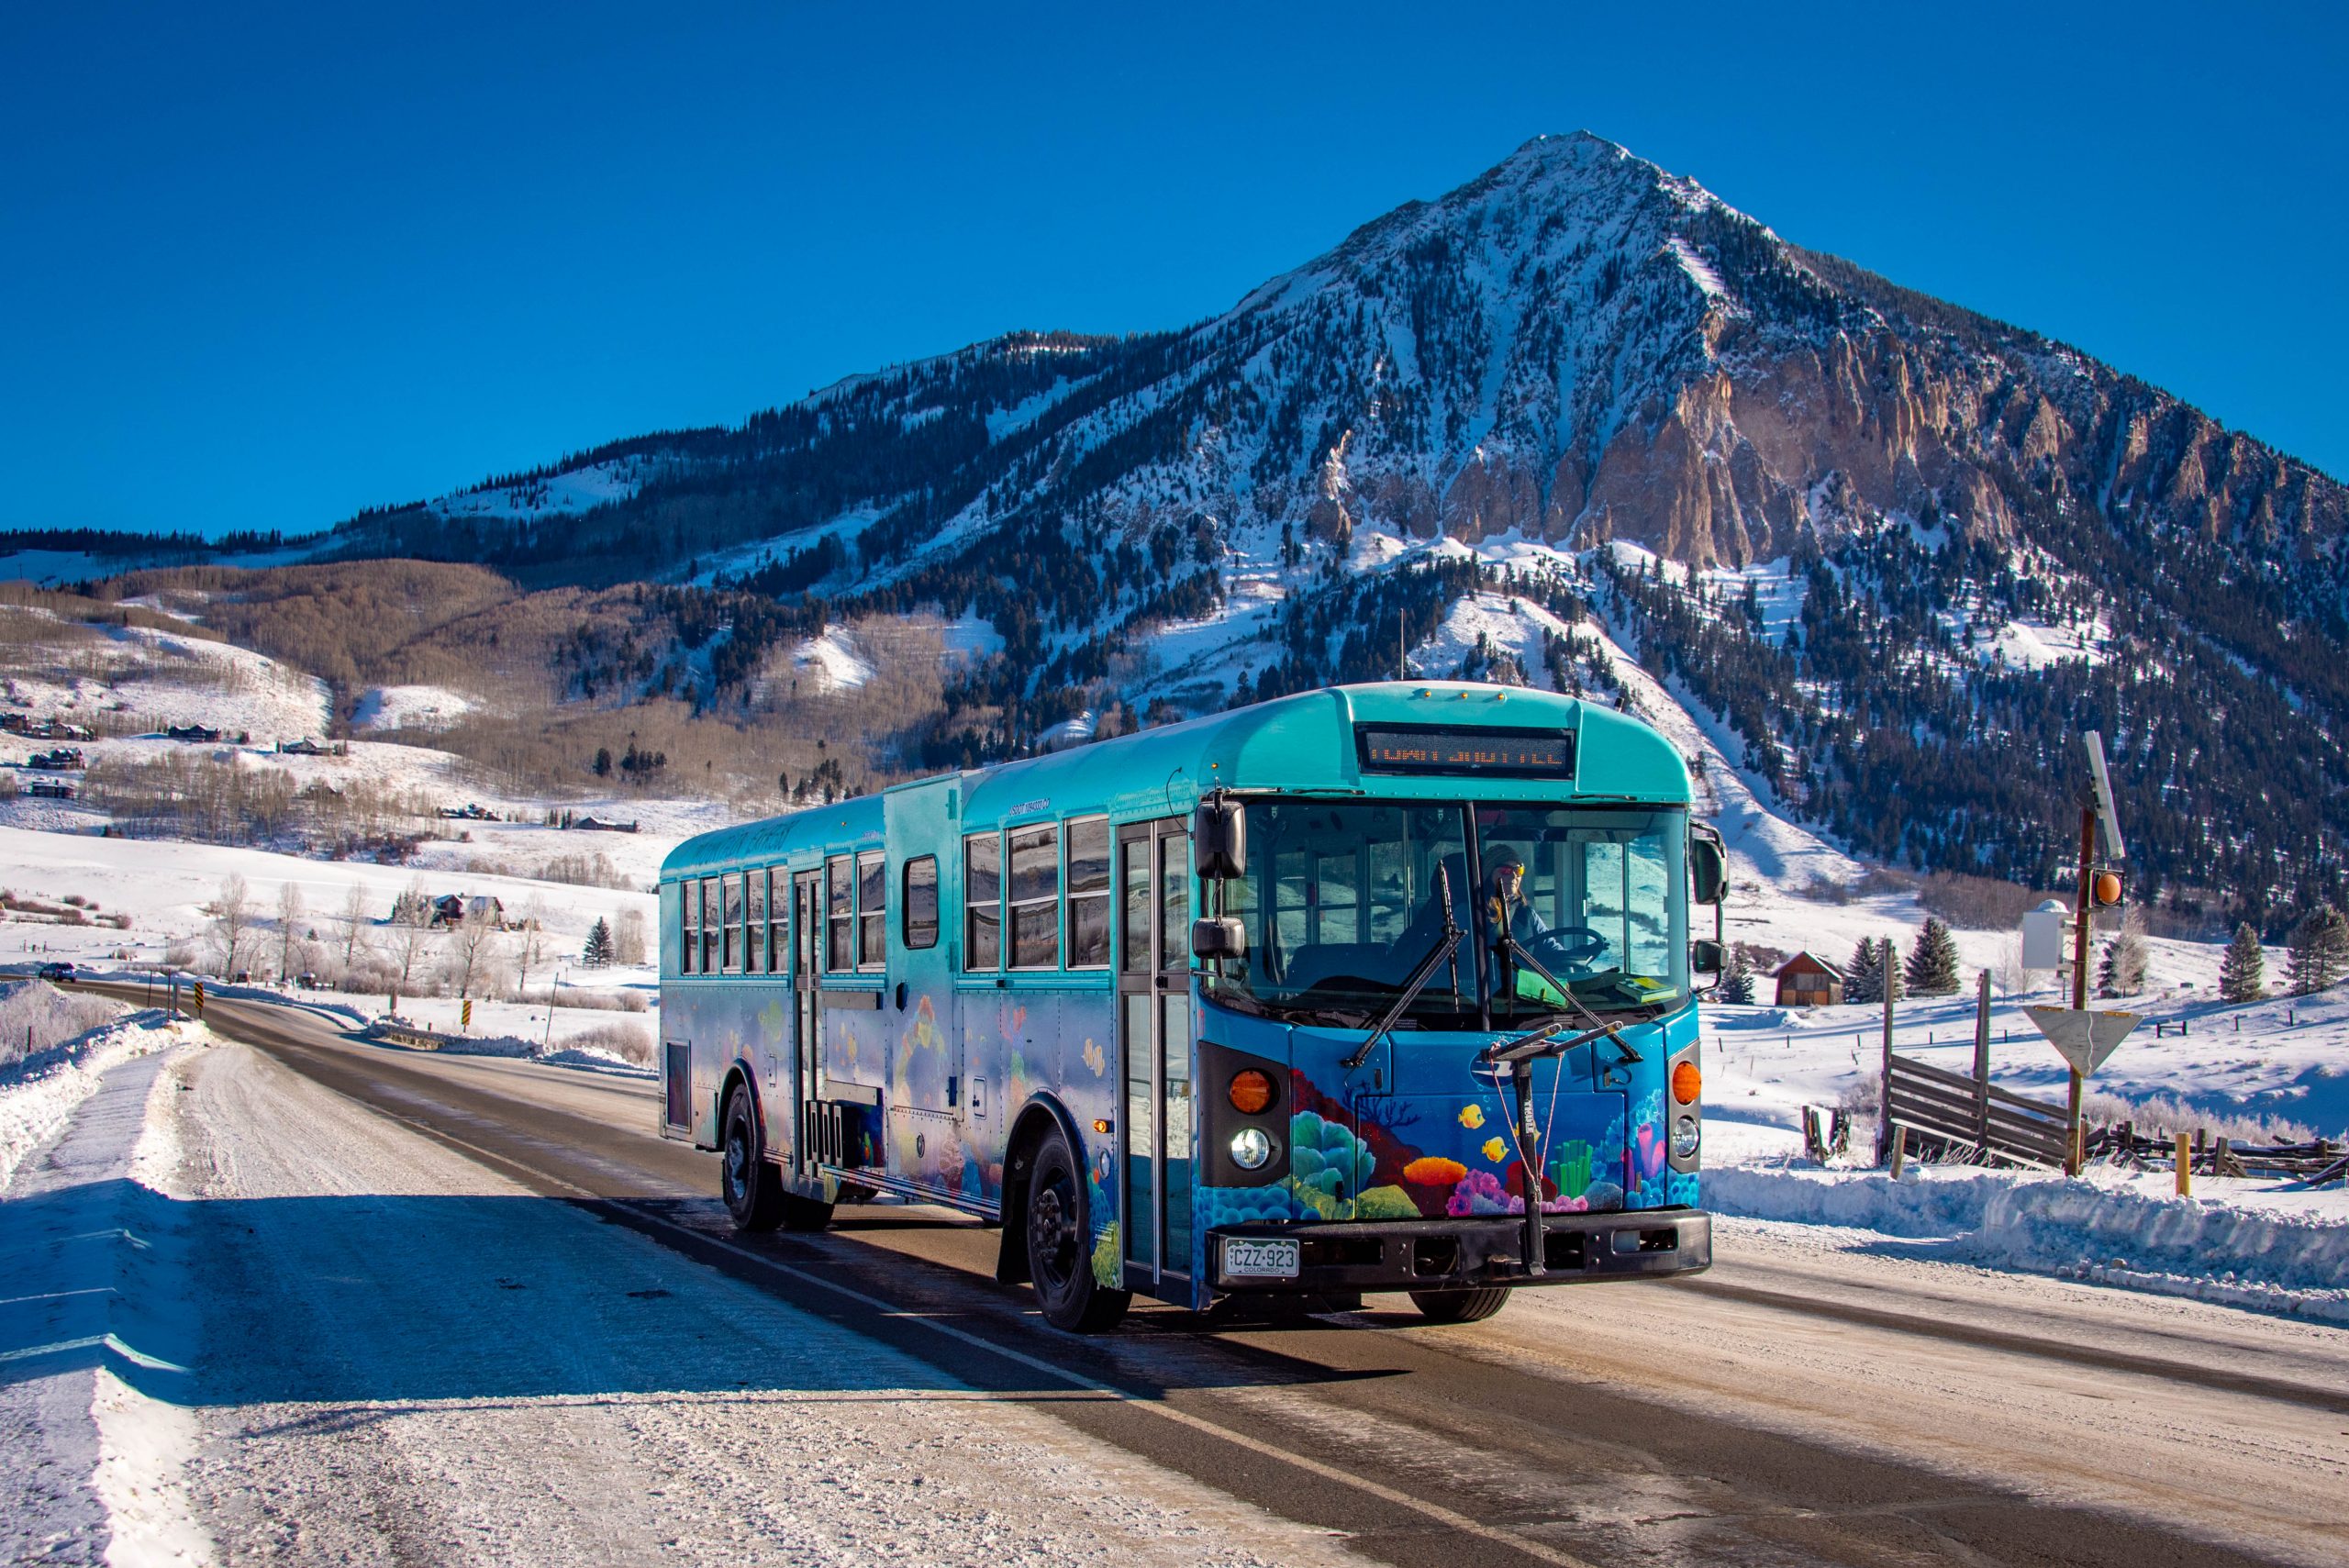 A bus drives south from Mt Crested Butte to Crested Butte. A snow covered Crested Butte is in the background.